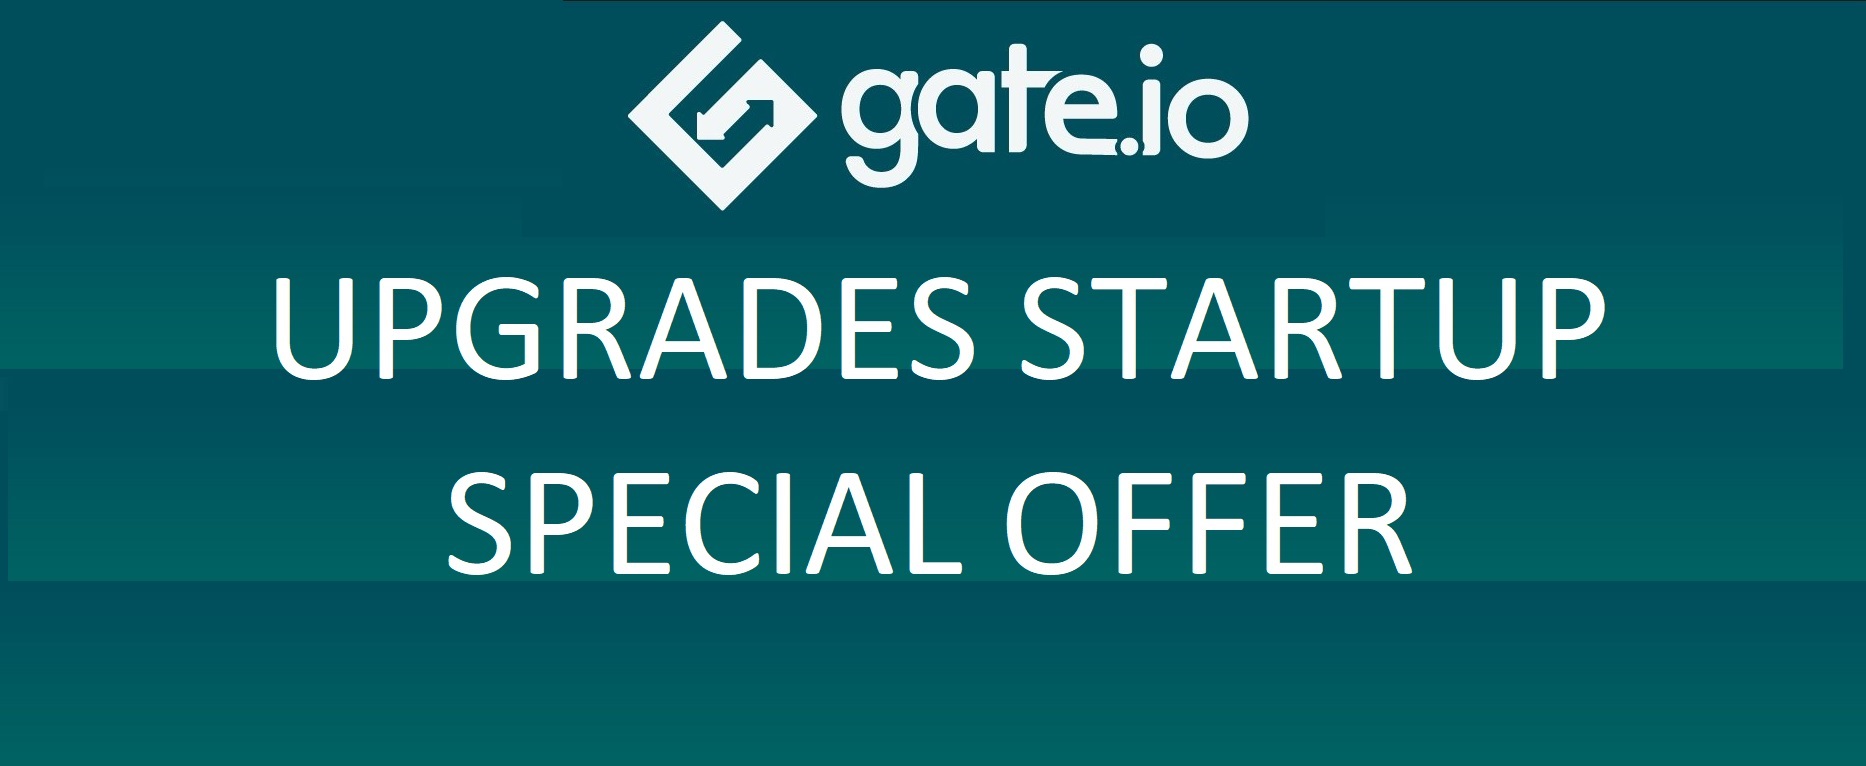 Gate.io Startup Special Offer Upgrade - Up to 20% discount